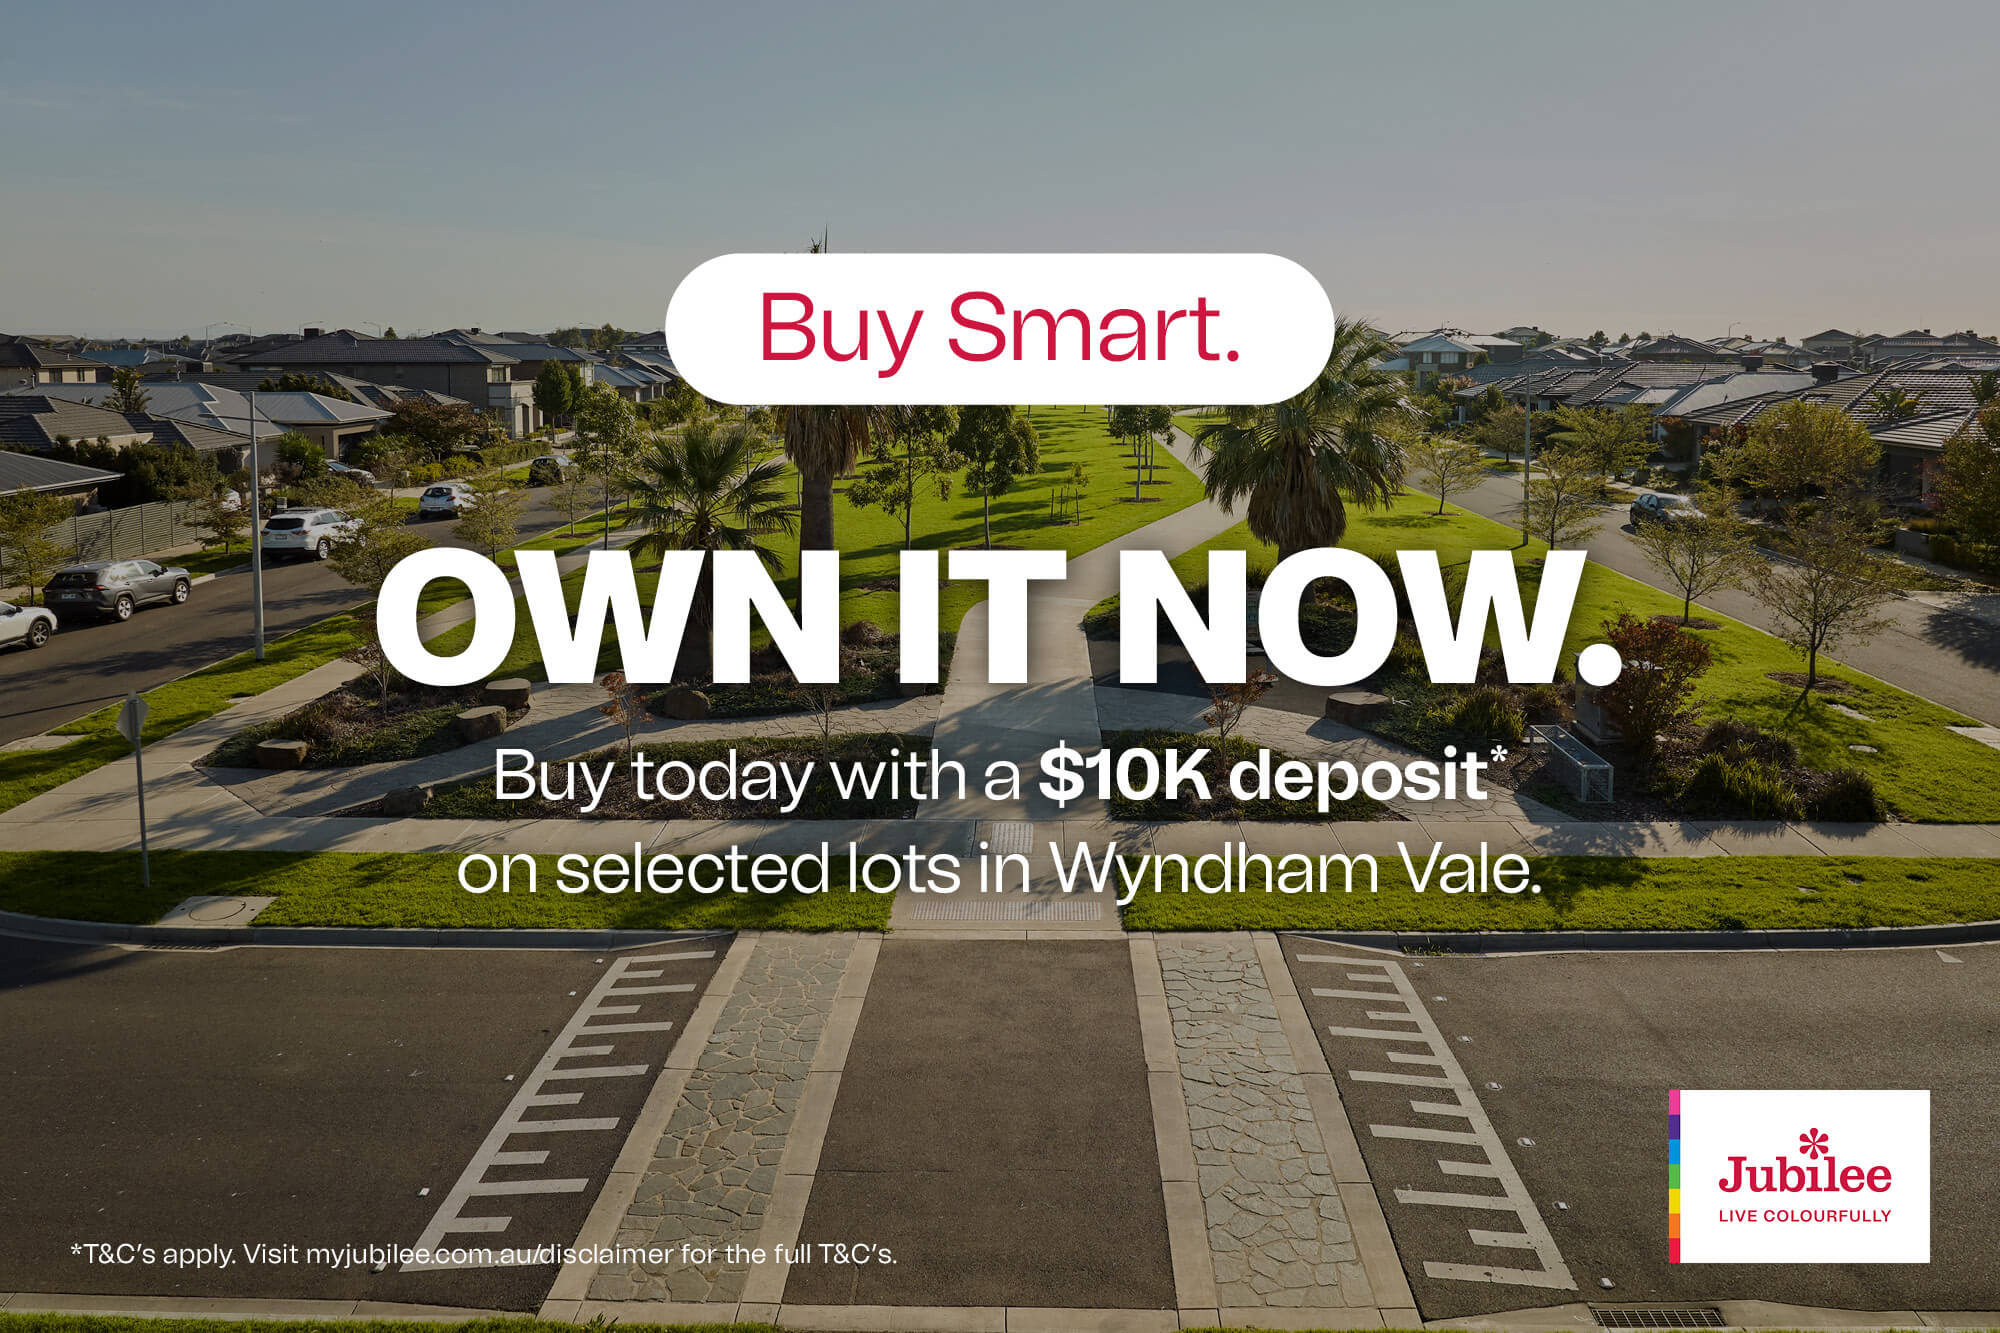  <span class="font-bold">Buy Smart with a $10K deposit*</span><br>on selected lots in Wyndham Vale